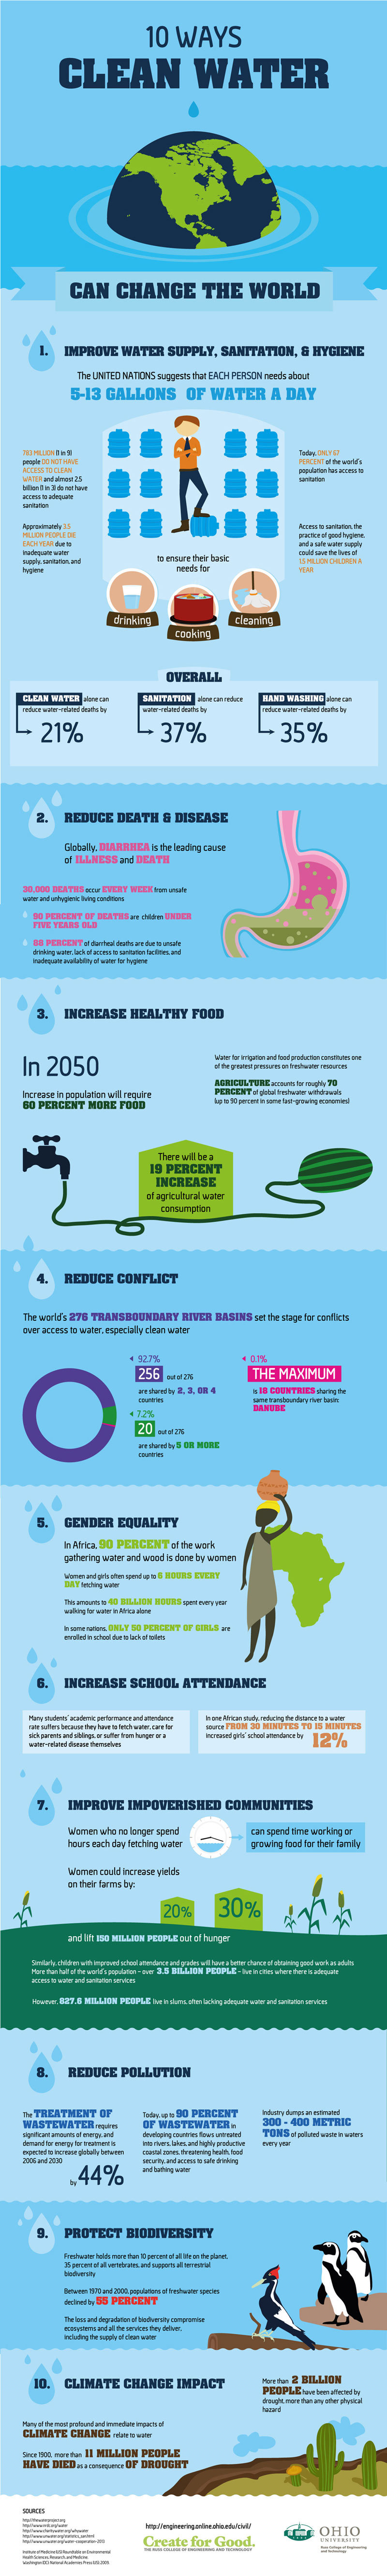 10 Ways Clean Water Can Change The World